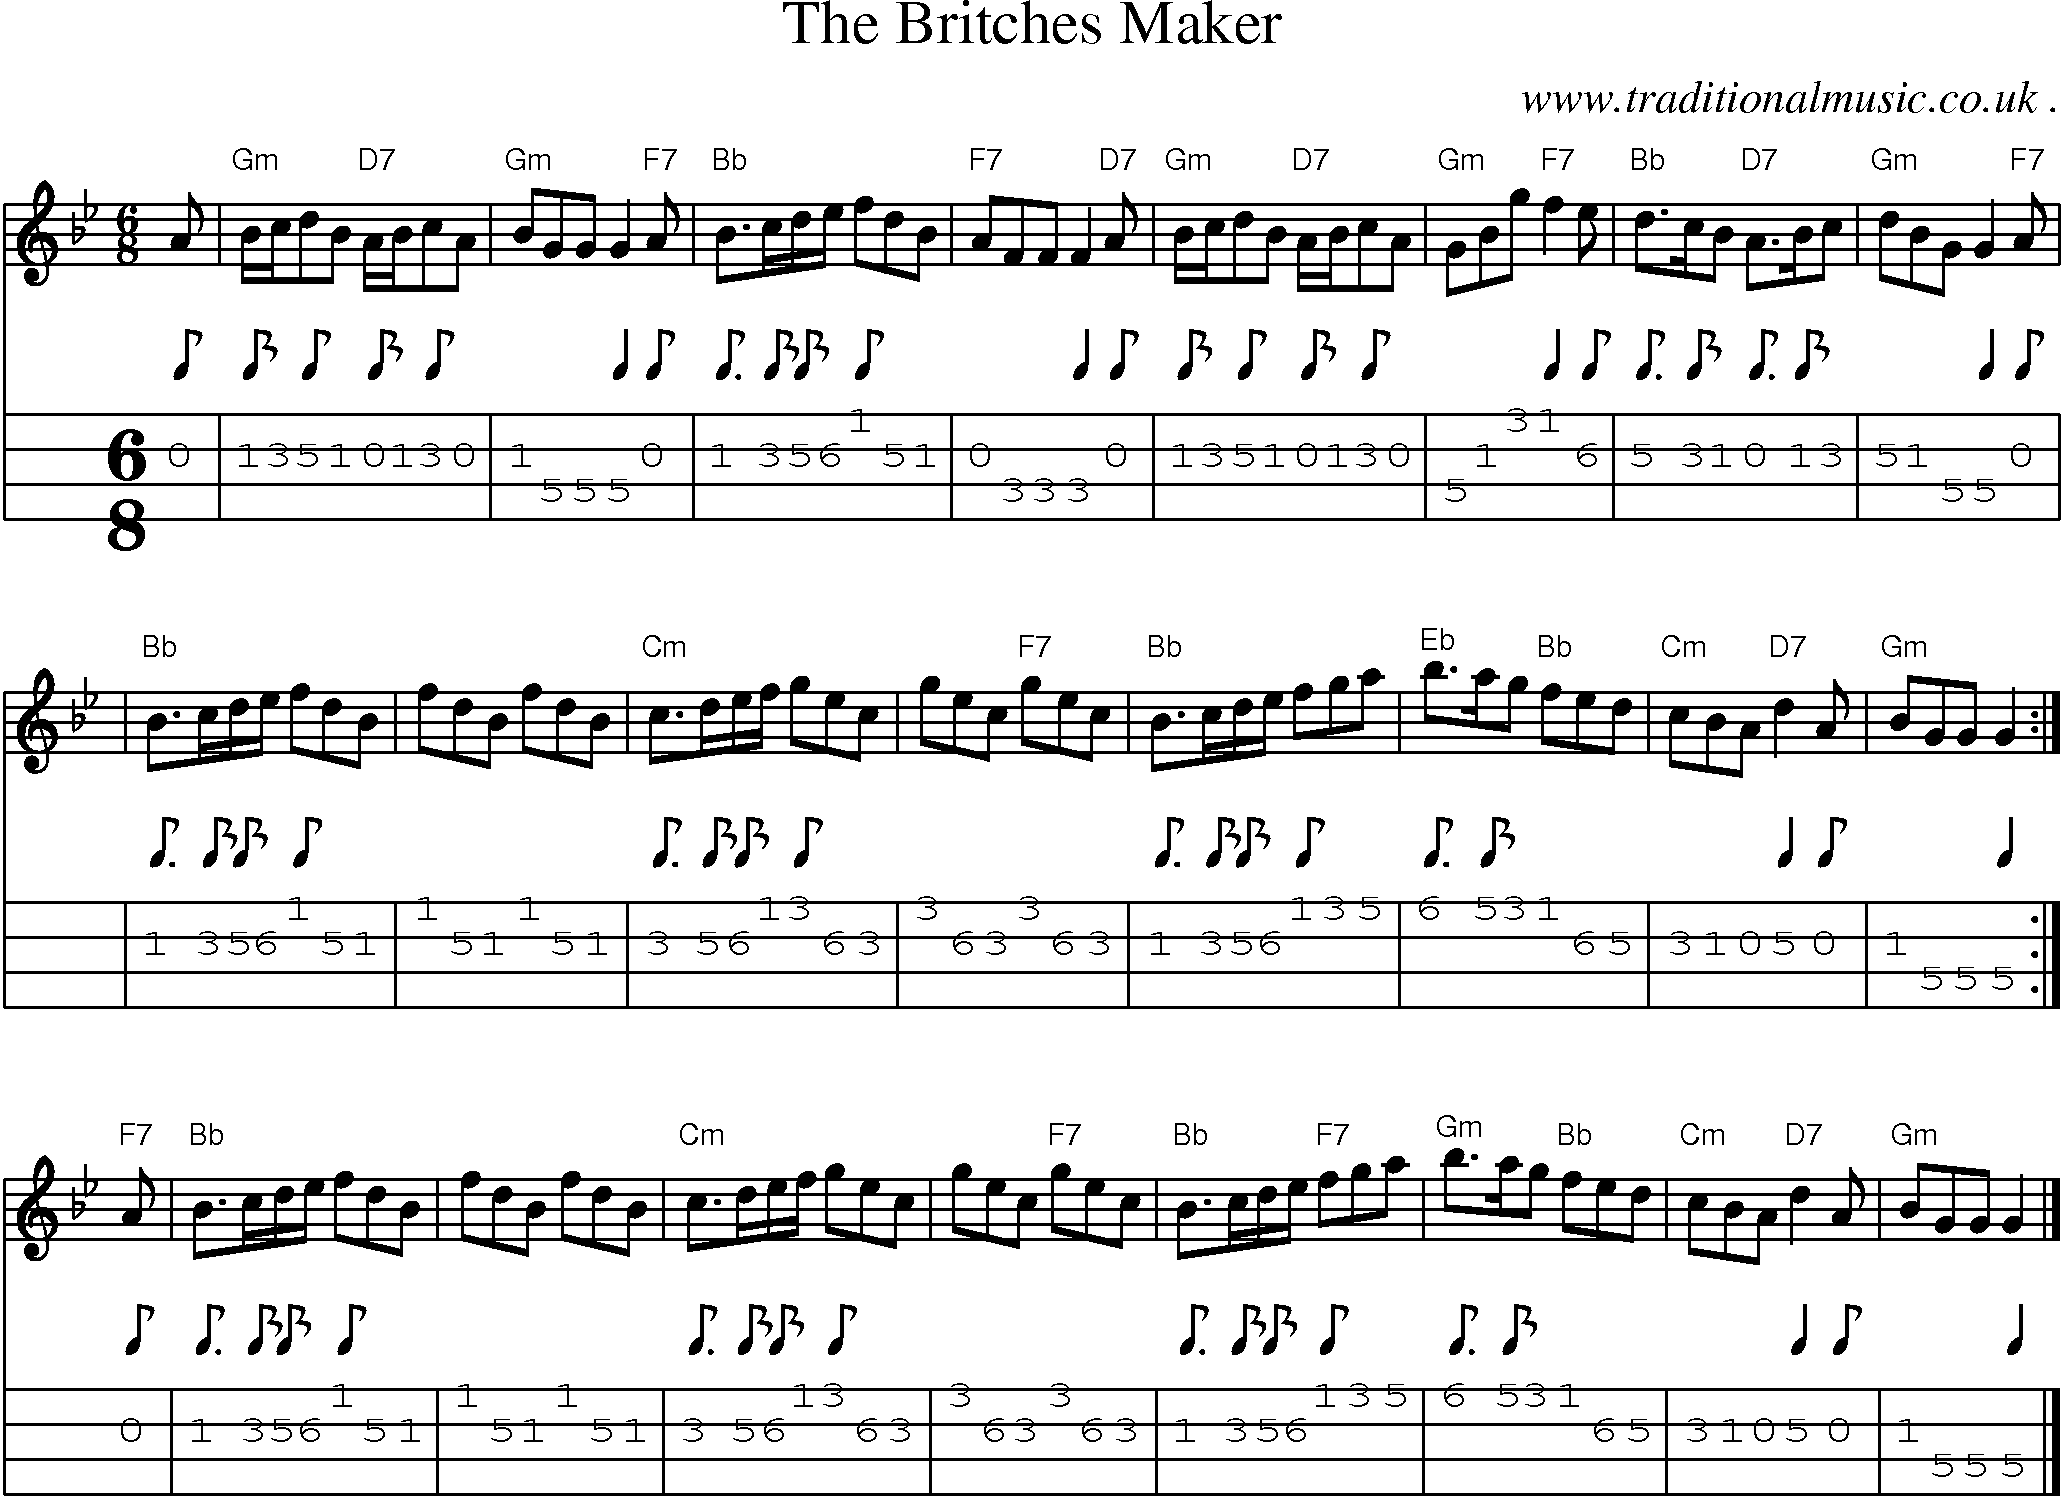 Sheet-music  score, Chords and Mandolin Tabs for The Britches Maker